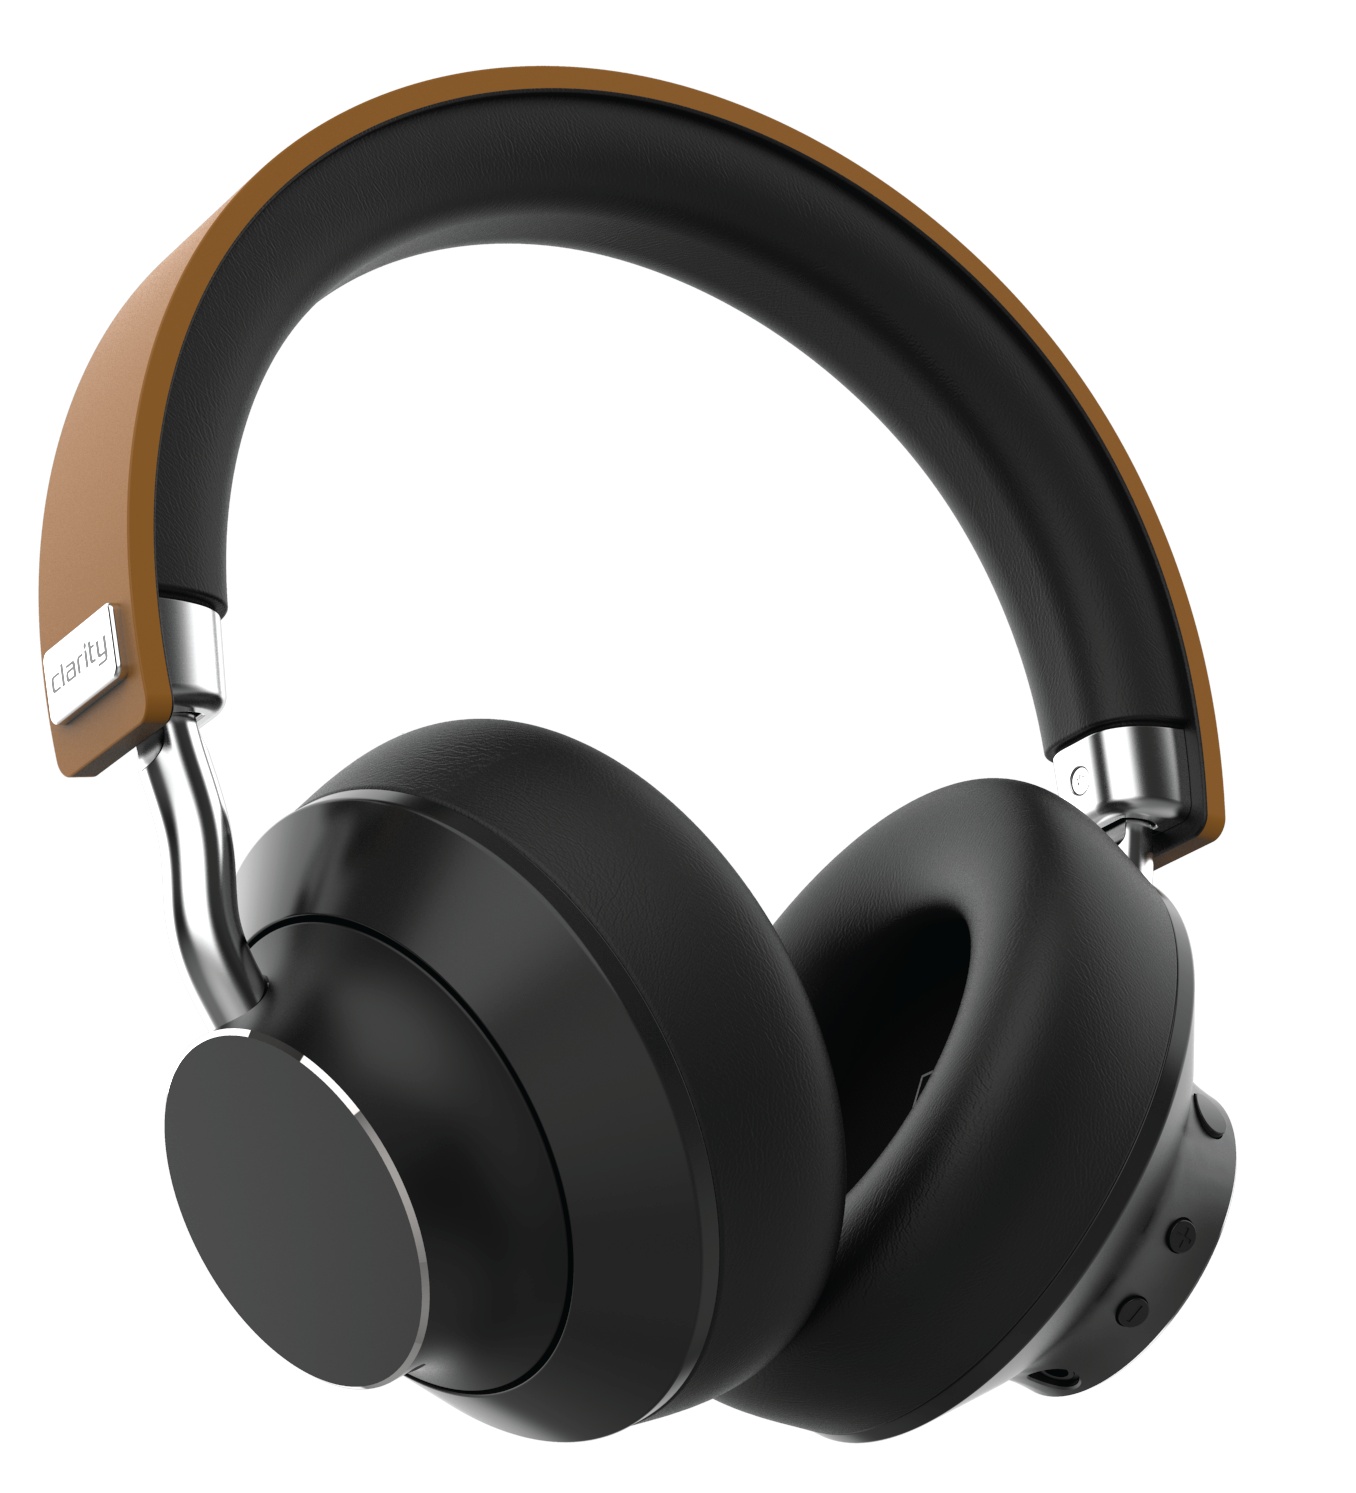 Clarity AH200 Amplified Headset